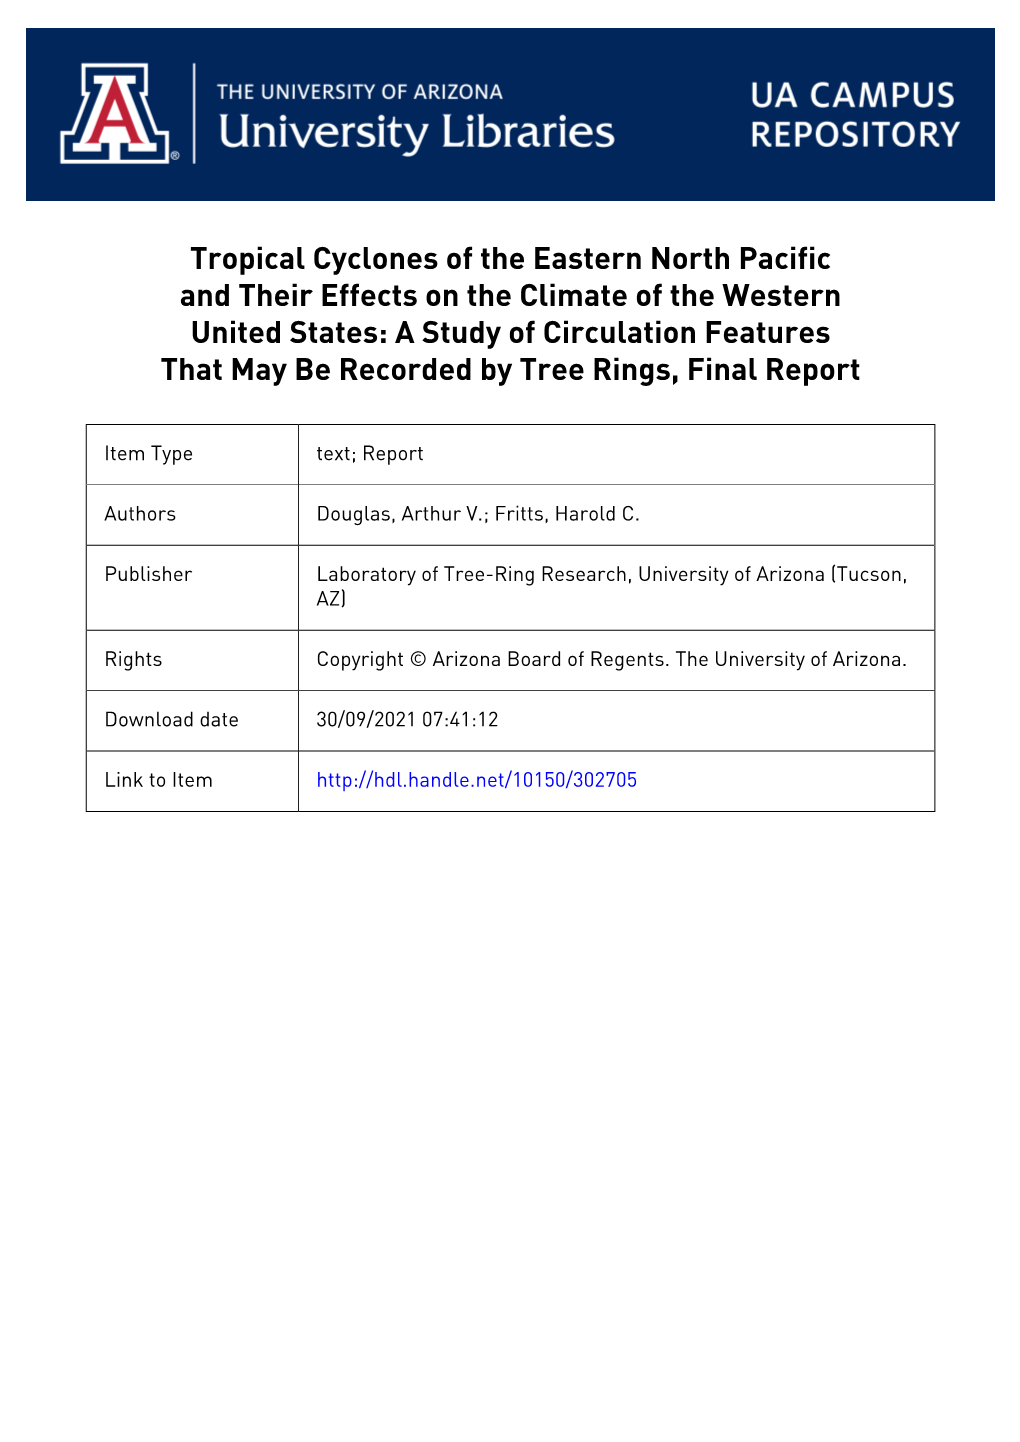 Tropical Cyclones of Thl Eastern North Pacific and Their Effects on the Climate of the Tern Unit Ed States